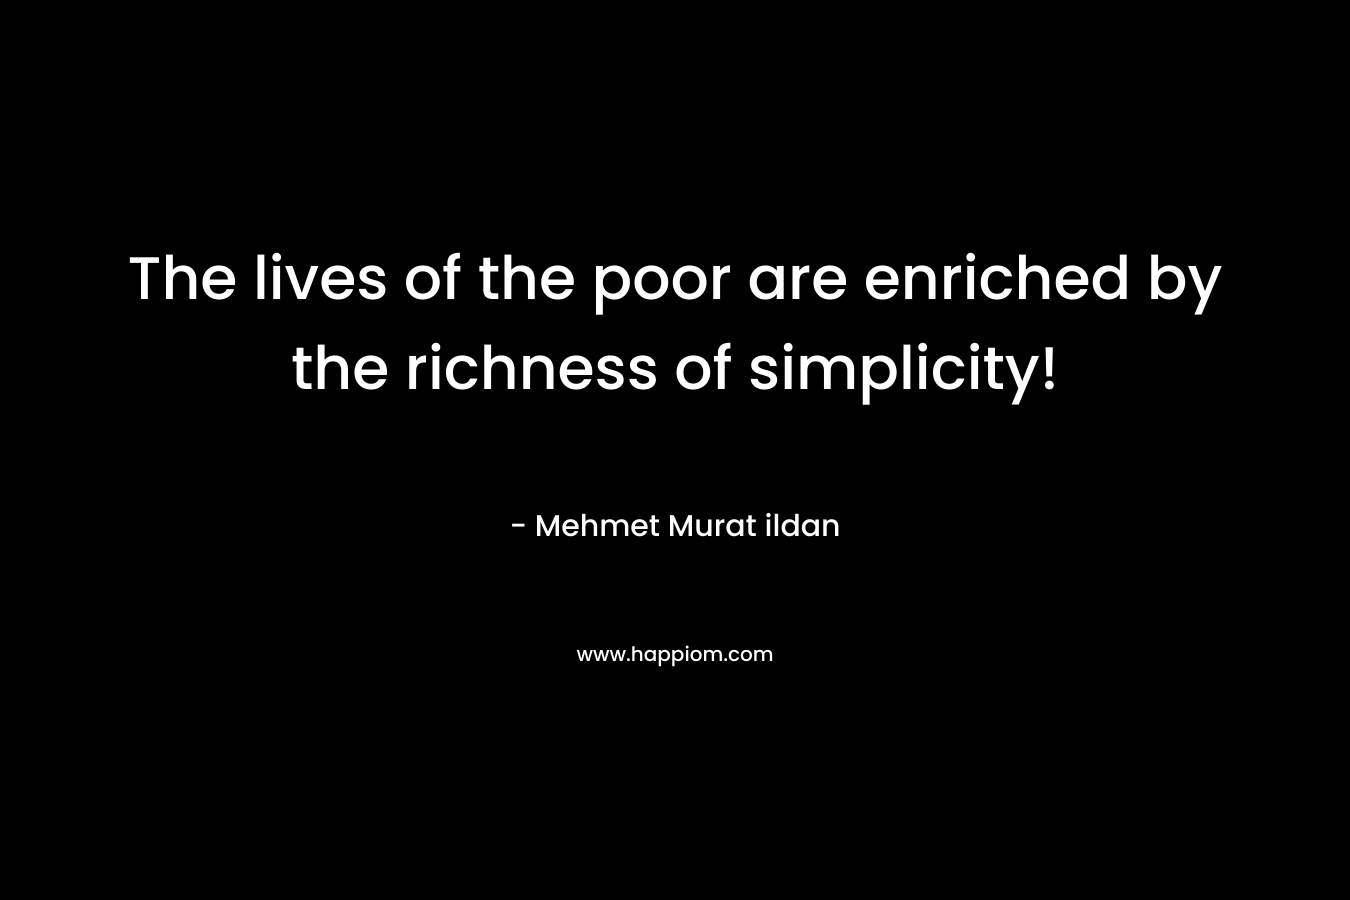 The lives of the poor are enriched by the richness of simplicity! – Mehmet Murat ildan